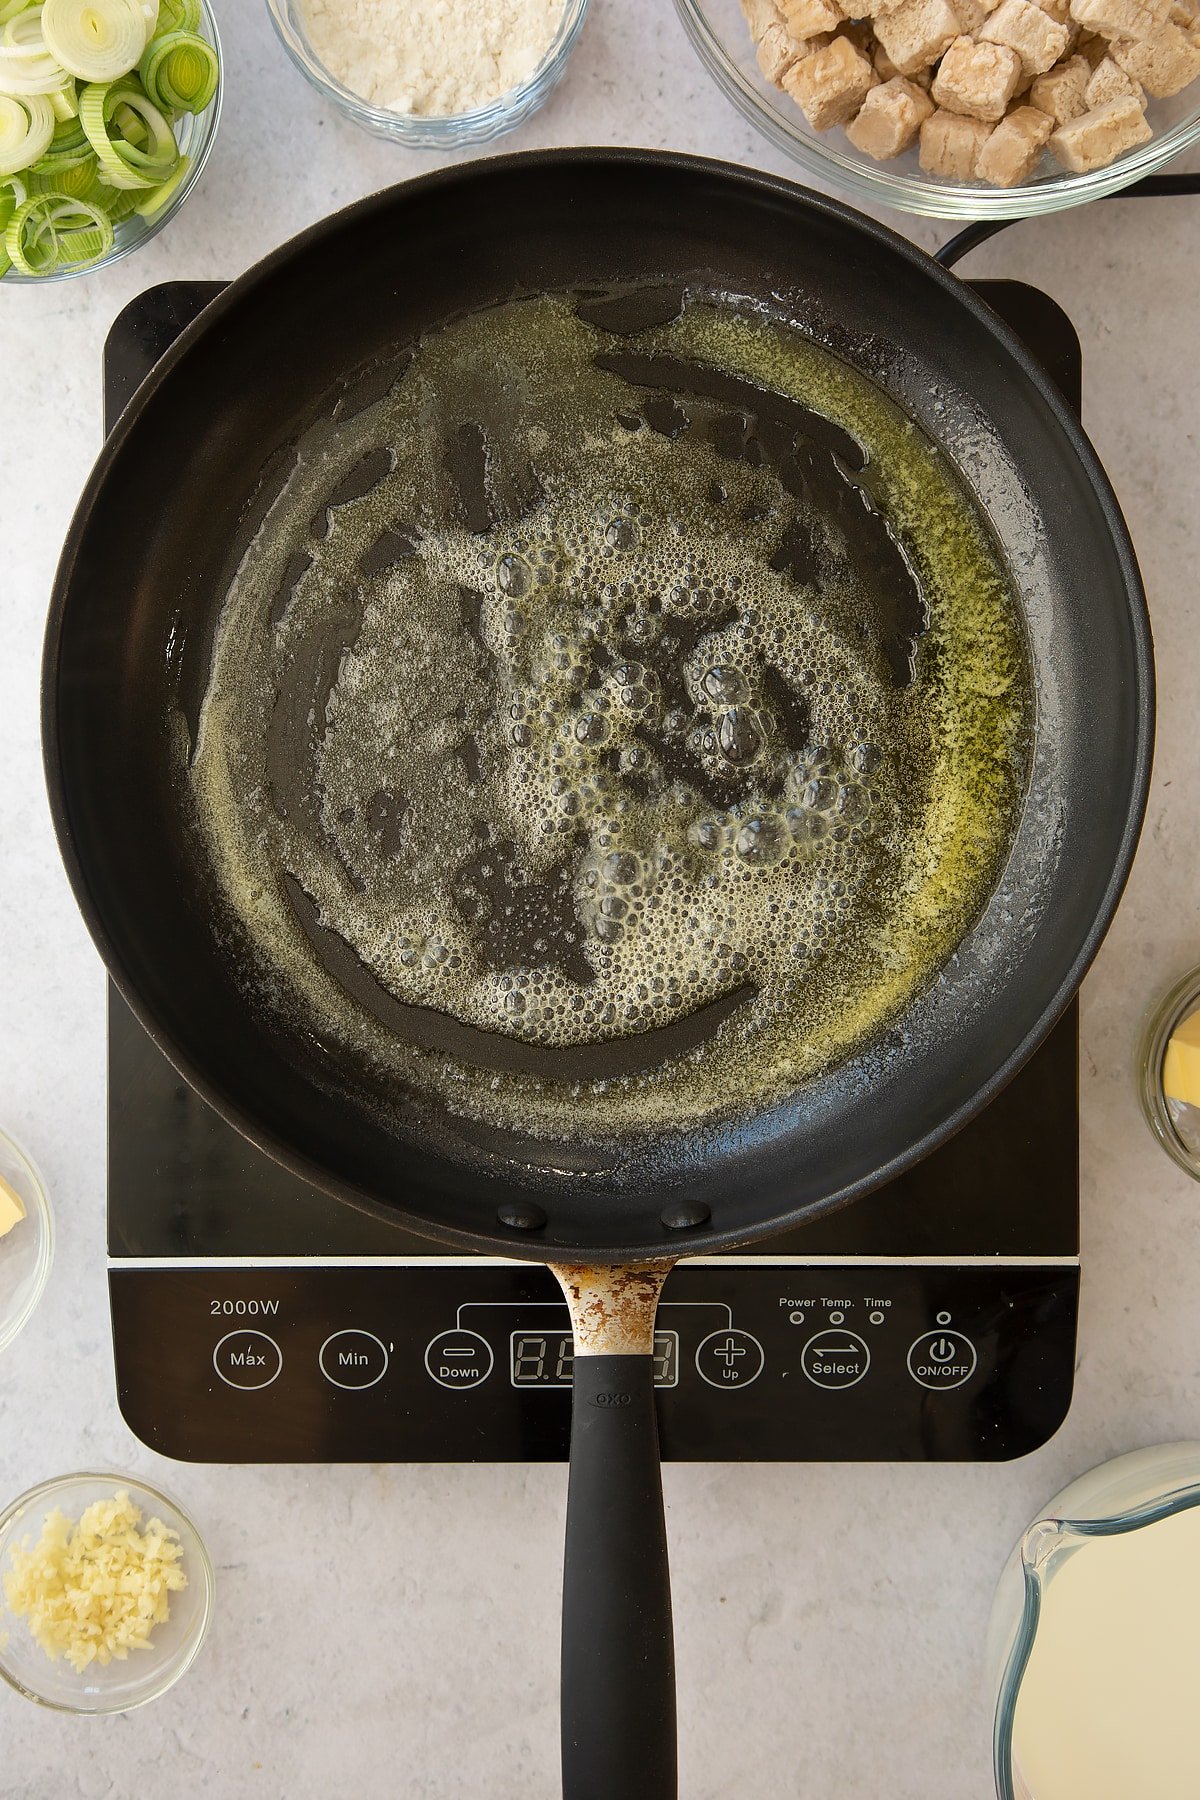 melted butter in a large frying pan on an induction hob.